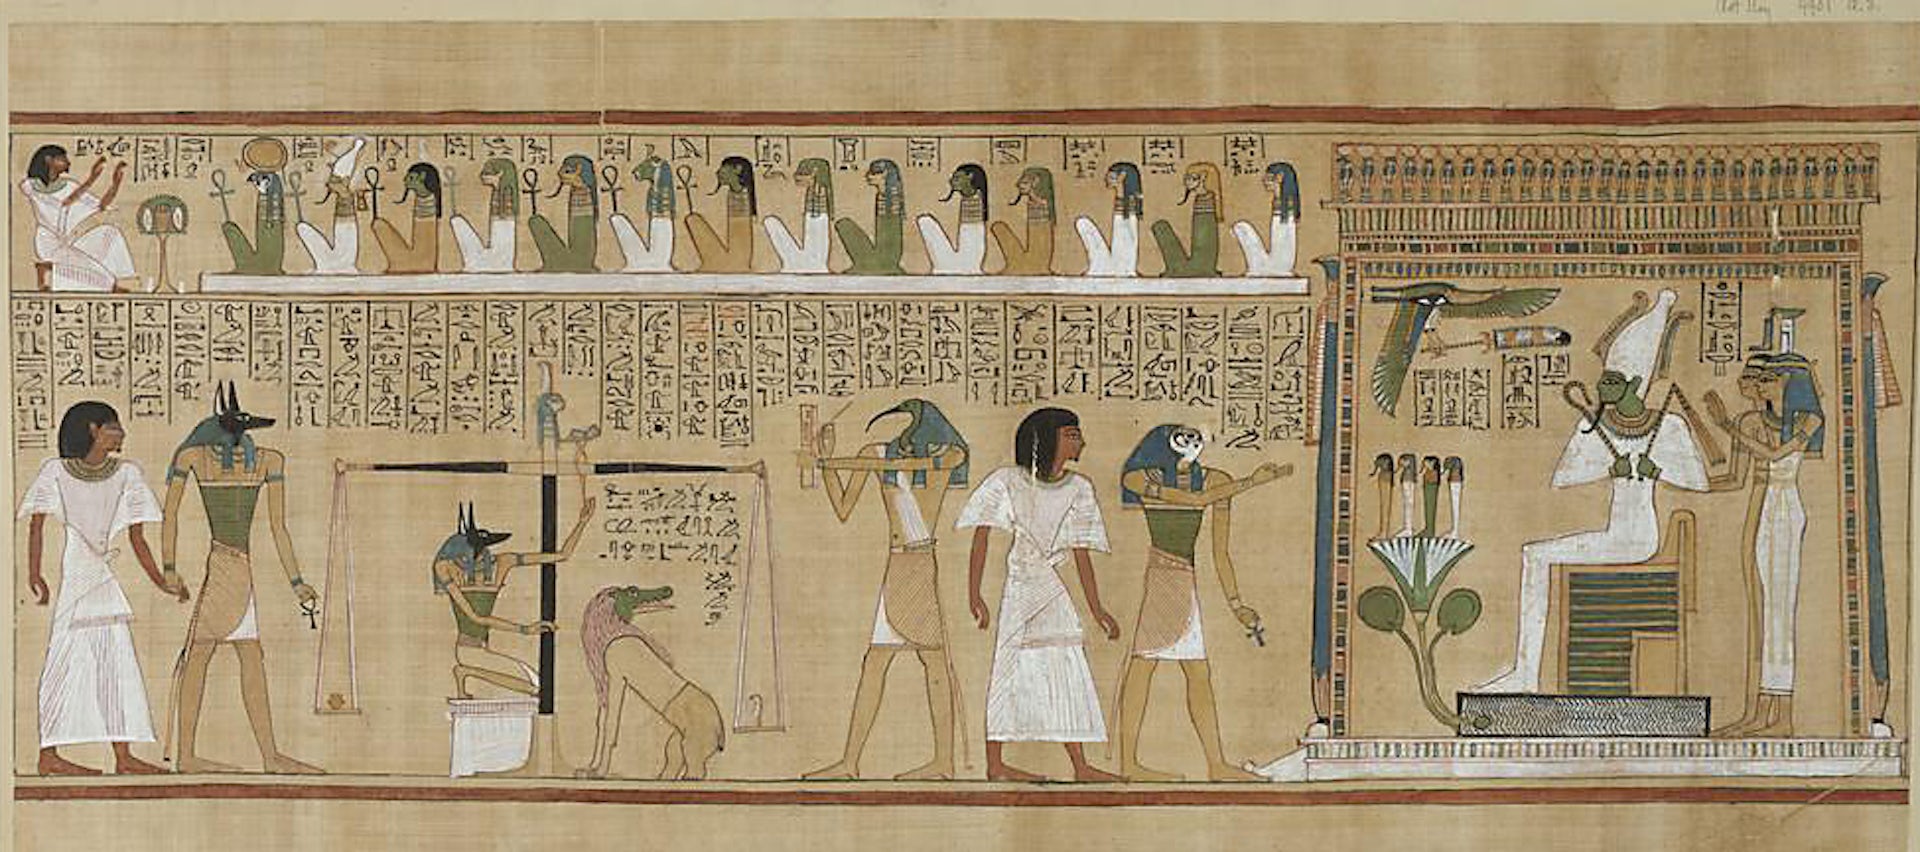 The Book of the Dead of Hunefer depicting Osiris